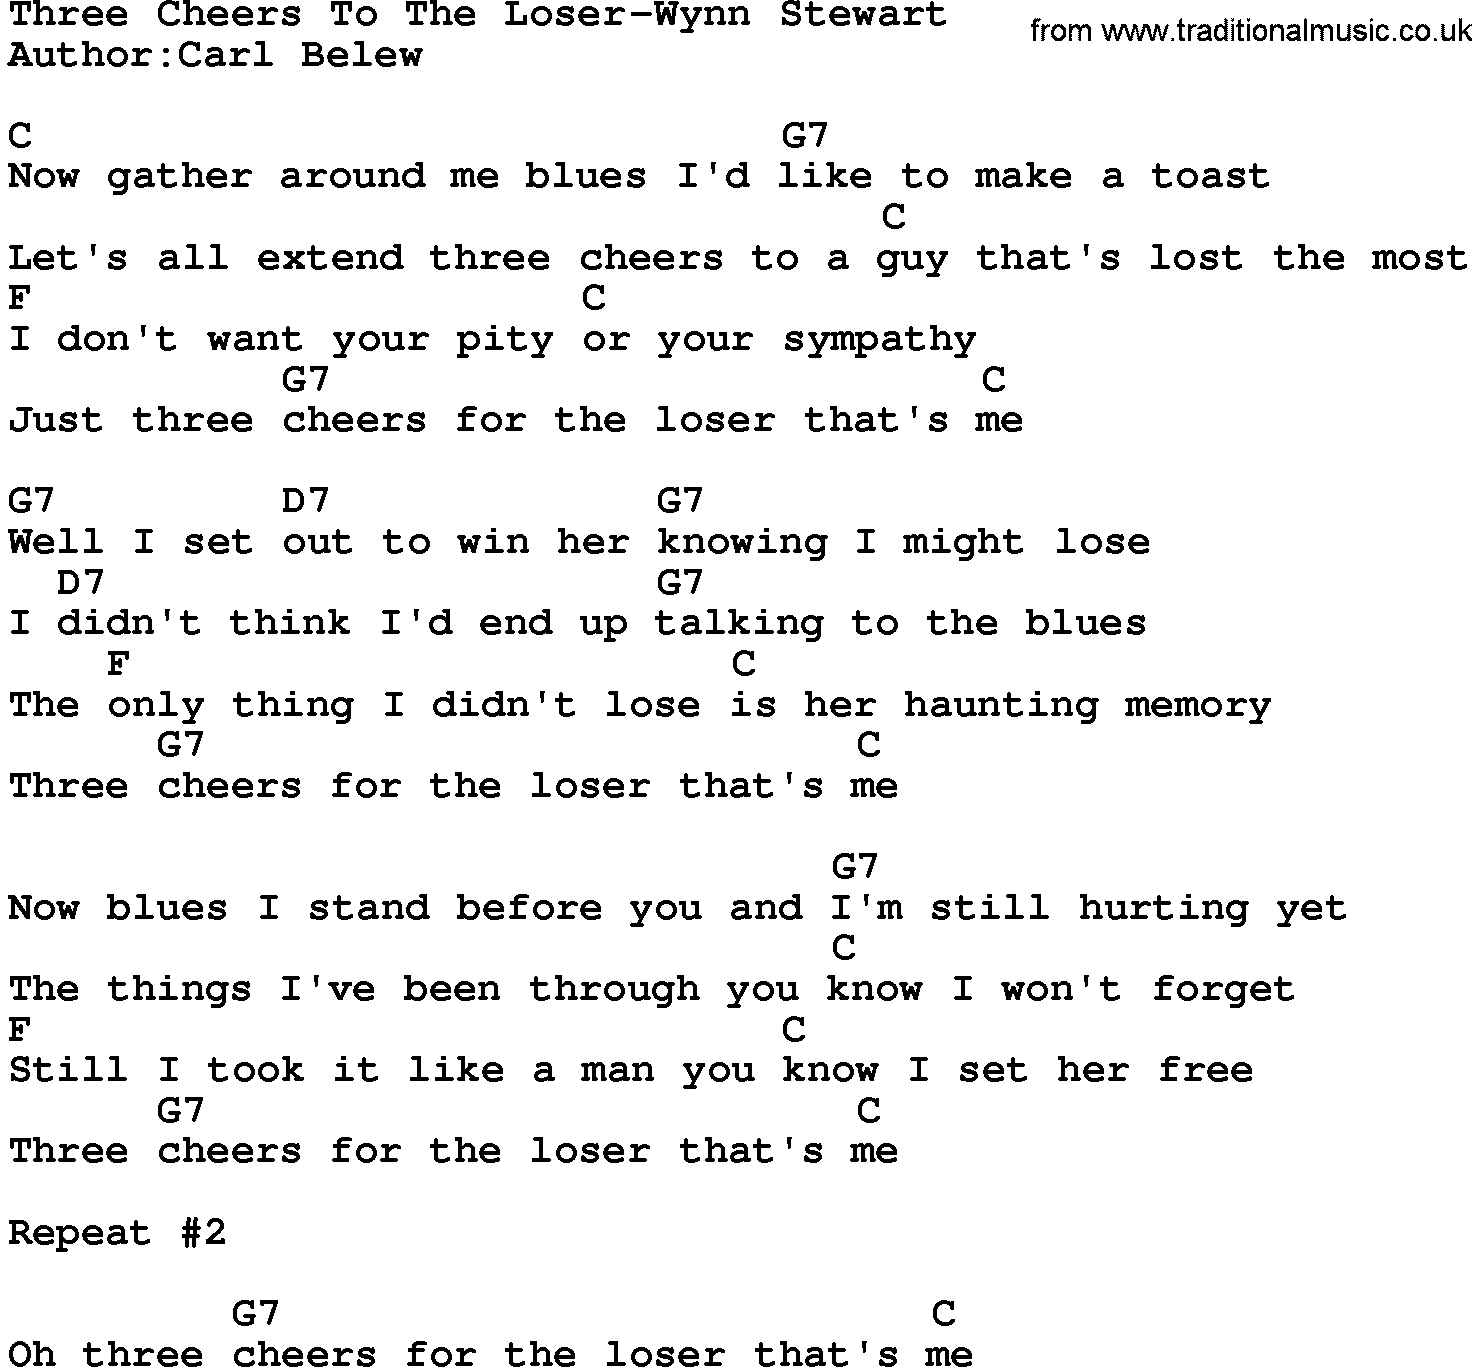 Country music song: Three Cheers To The Loser-Wynn Stewart lyrics and chords